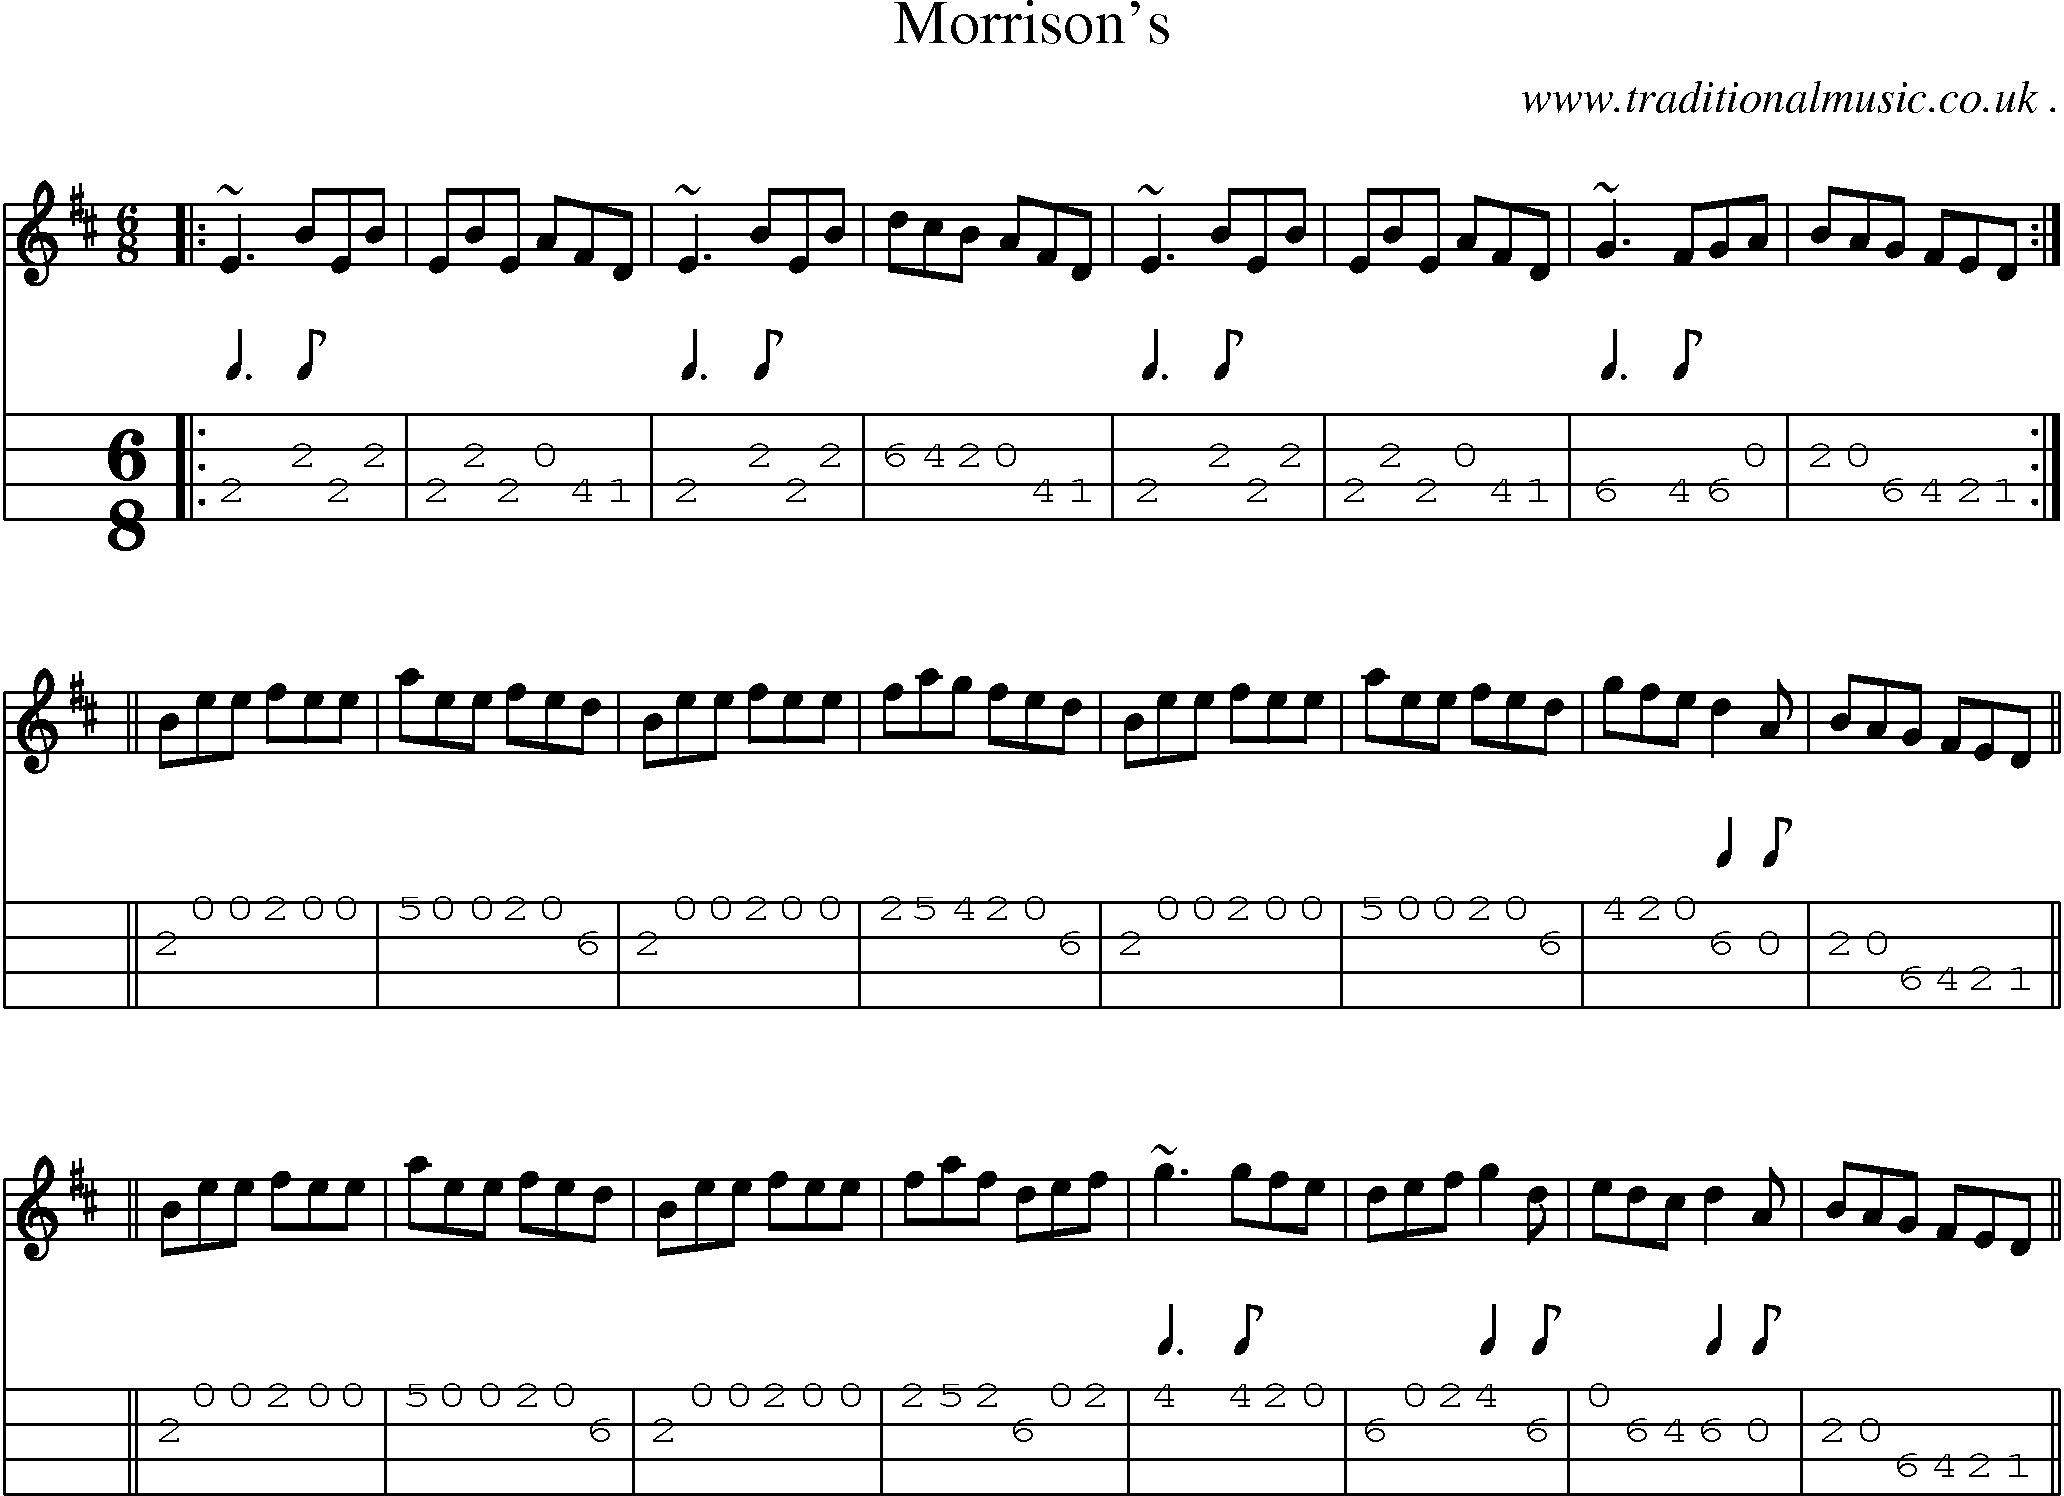 Sheet-music  score, Chords and Mandolin Tabs for Morrisons